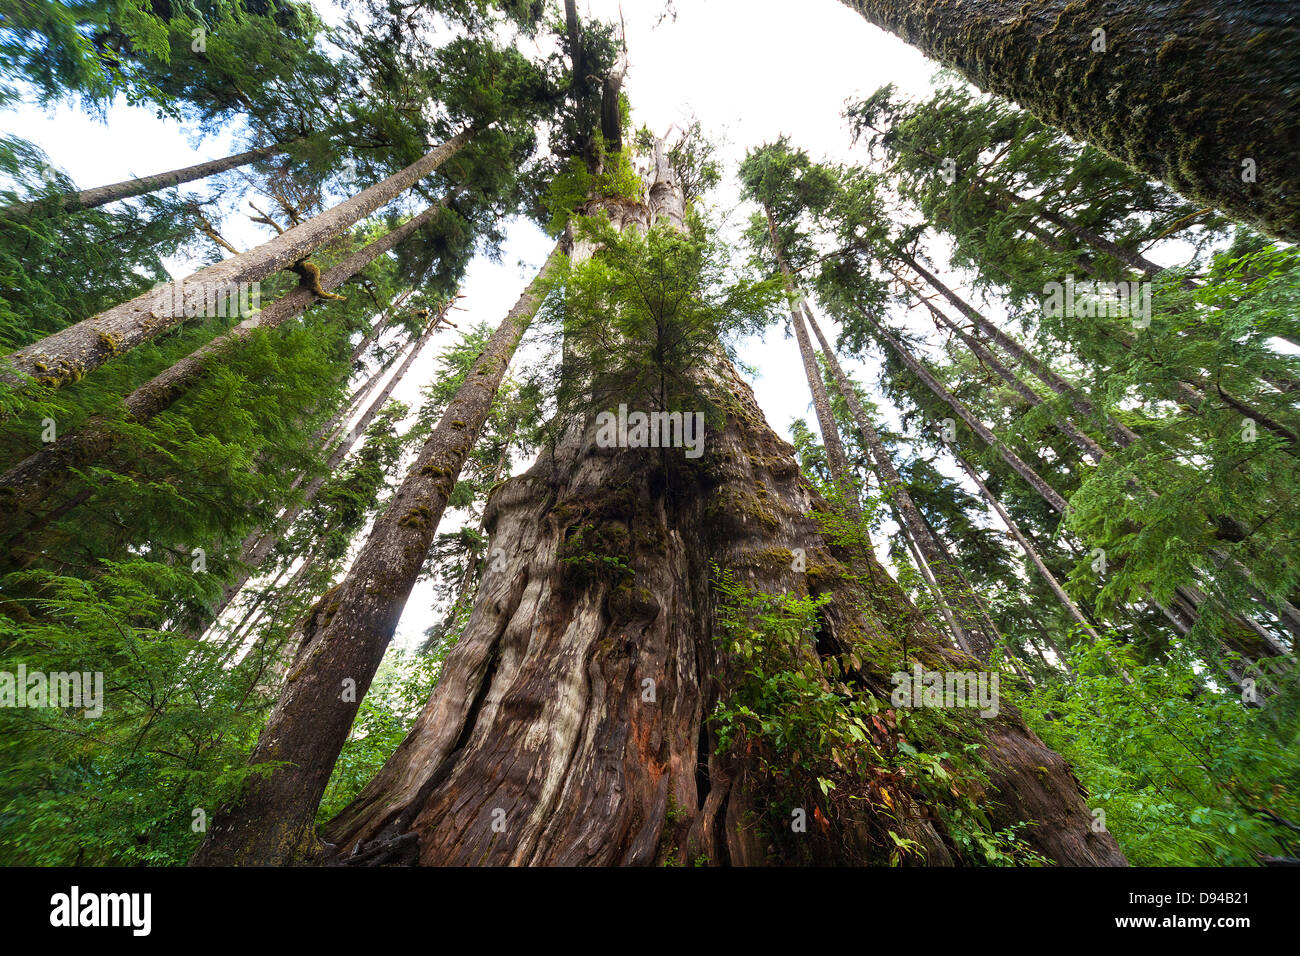 Tall Trees in forest Banque D'Images